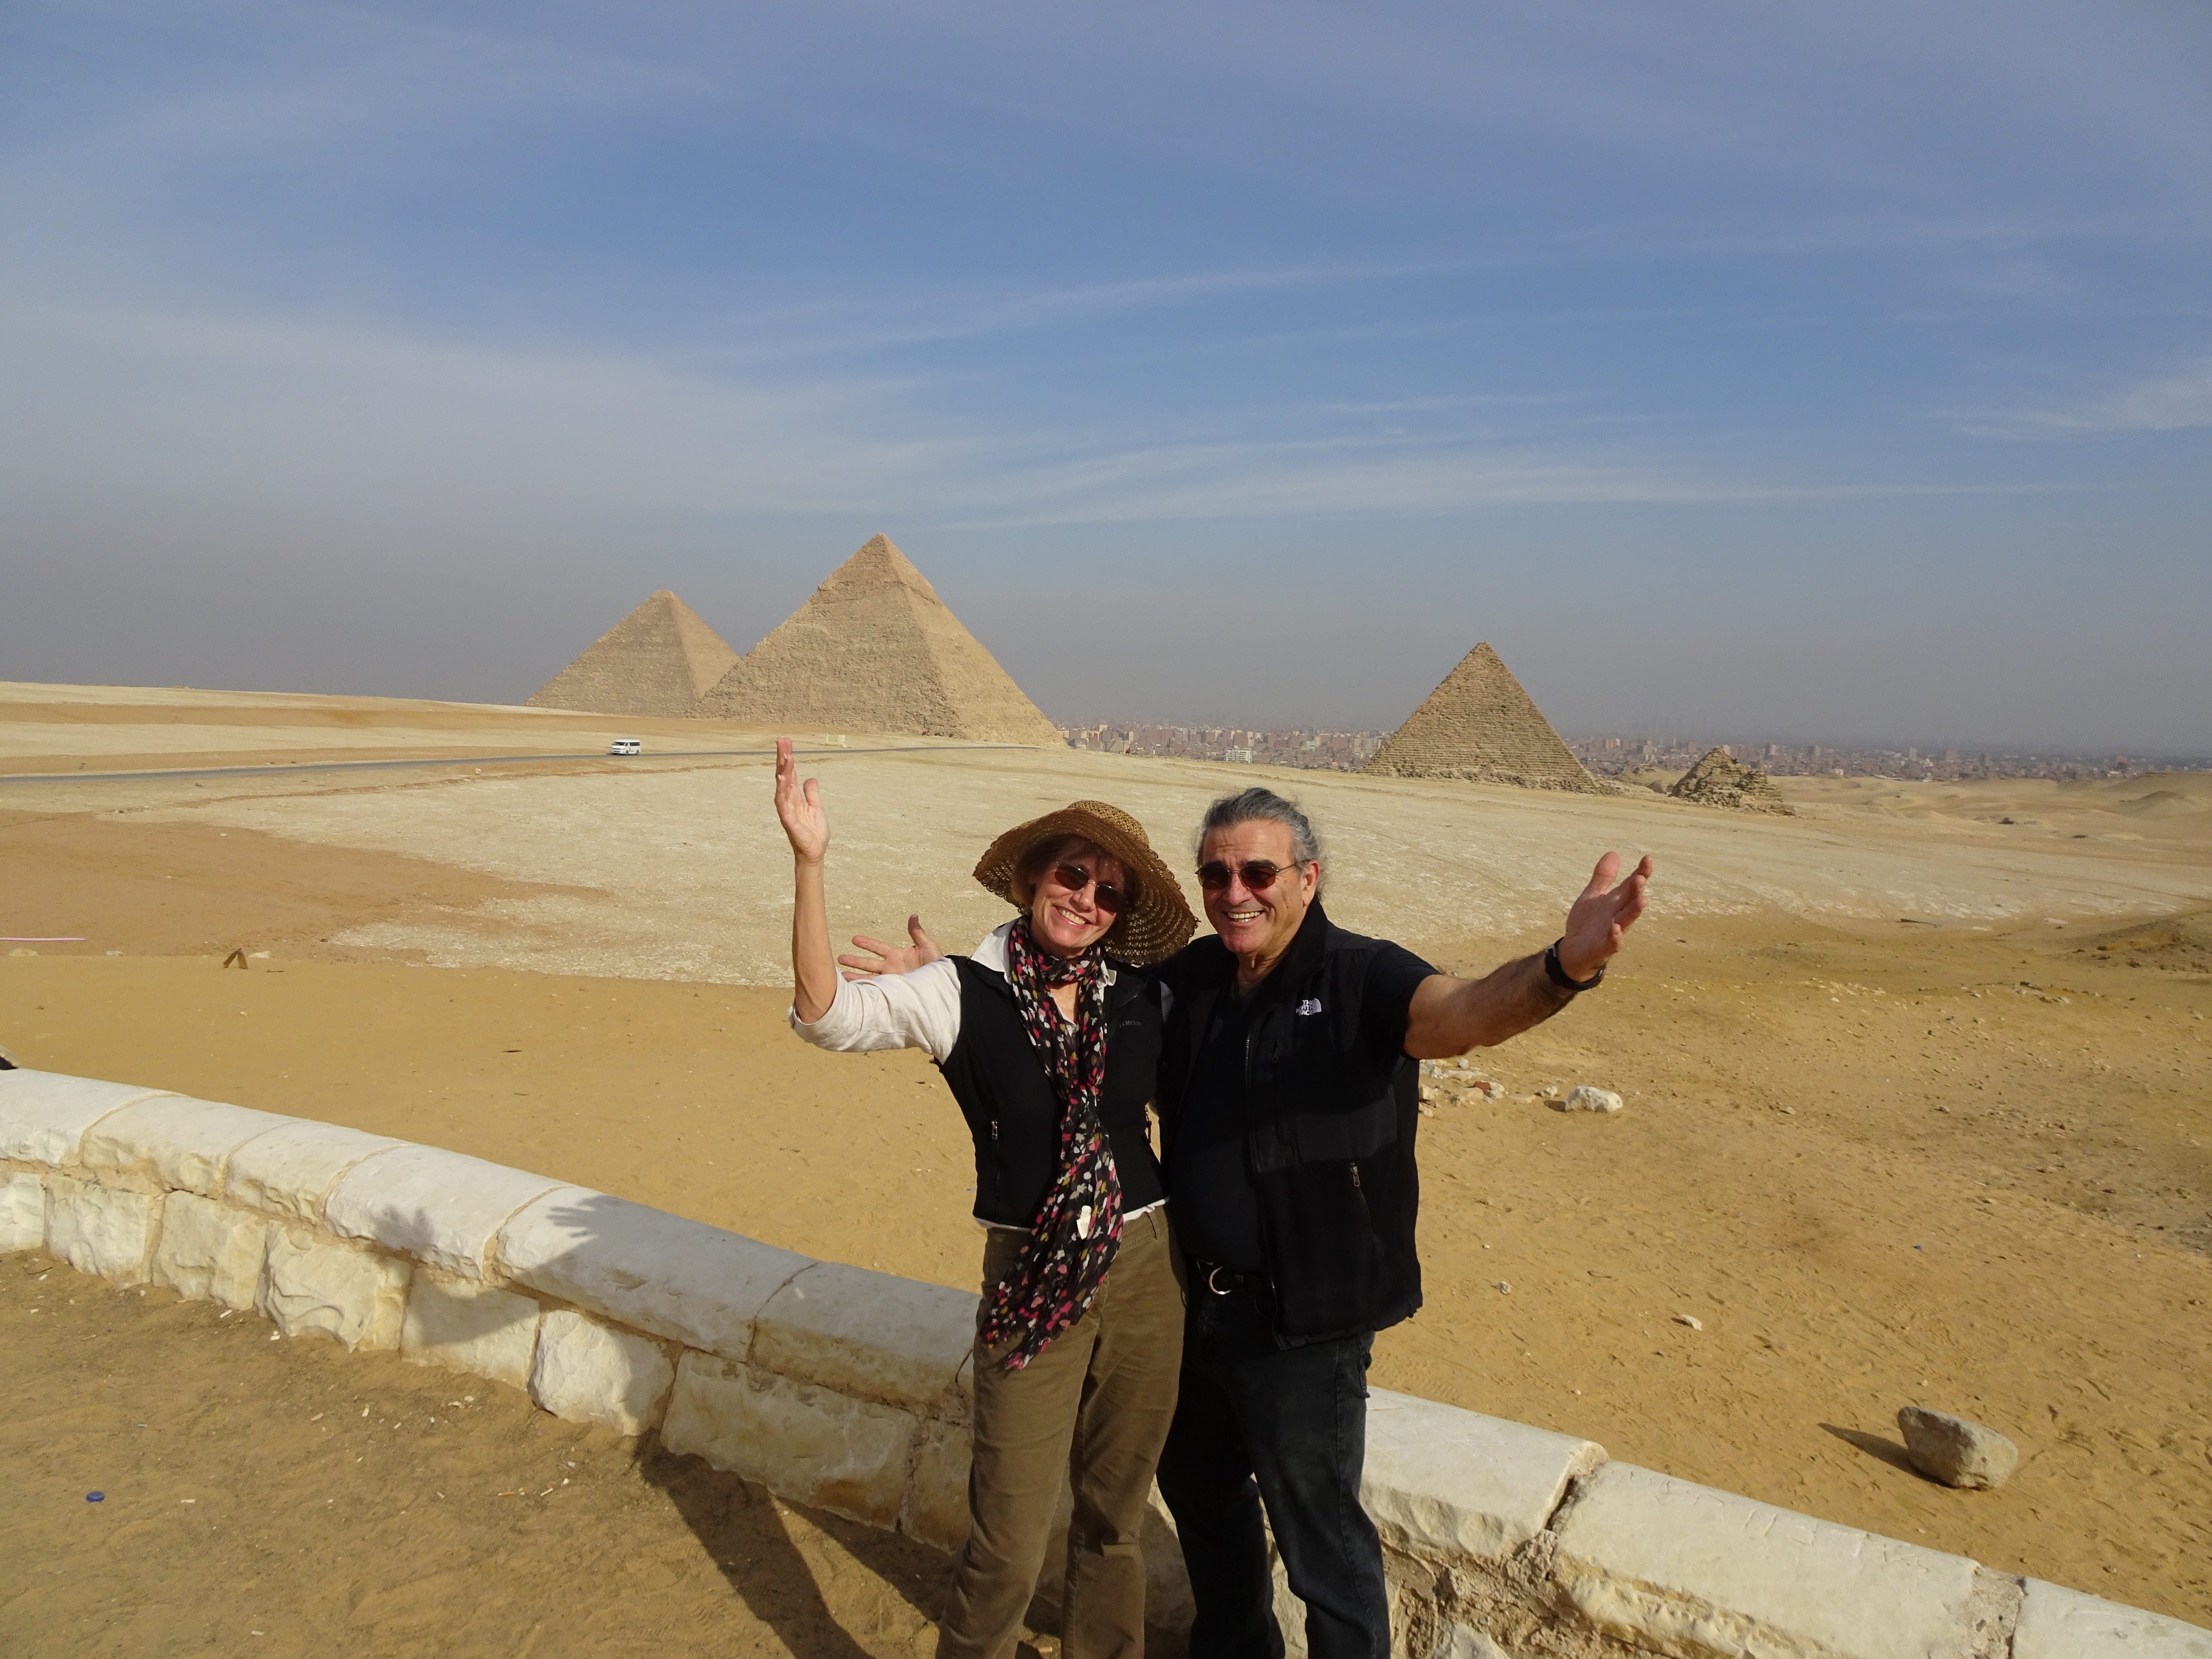 In front of the Great Pyramids of Giza